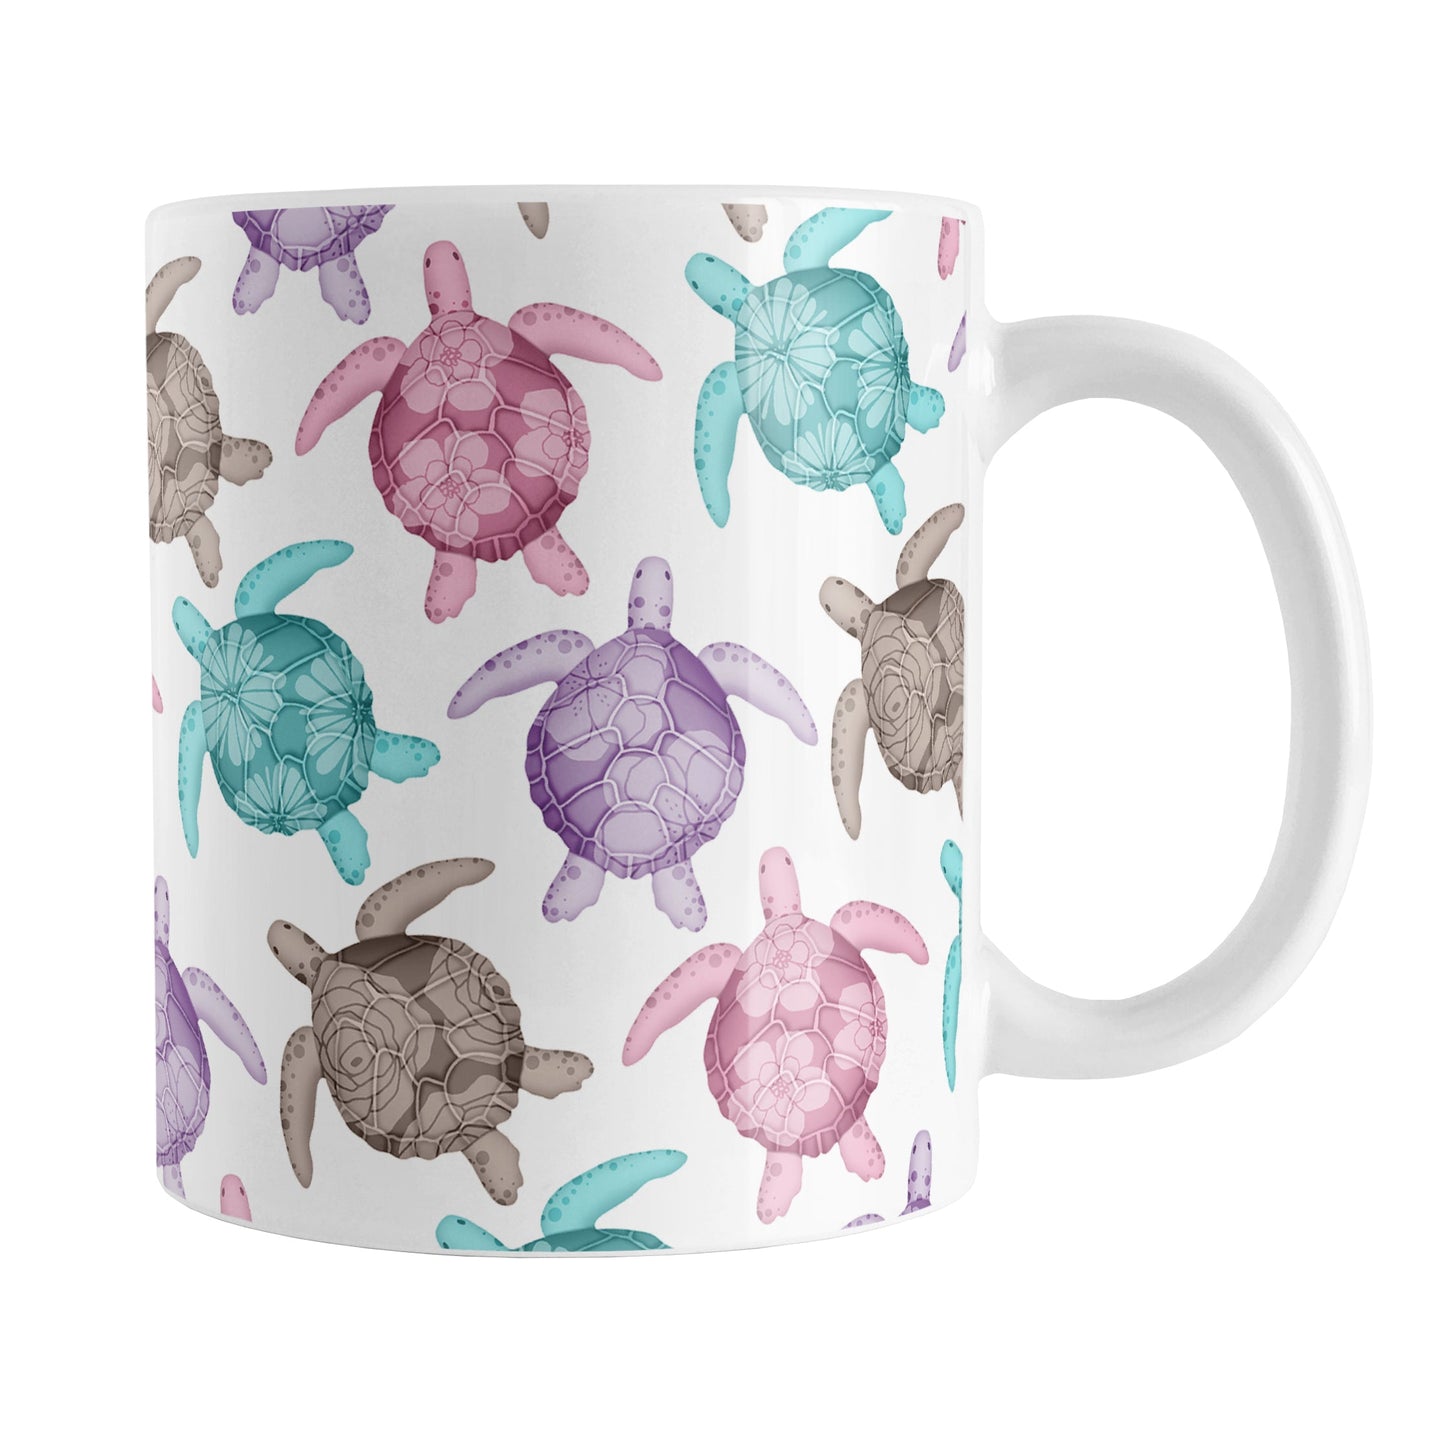 Cute Sea Turtles Pattern Mug (11oz) at Amy's Coffee Mugs. A ceramic mug with a pattern of sea turtles in a cute color palette of pink, purple, teal and brown that wraps around the mug to the handle. Each cool colored sea turtle has a different floral watermark over its shell.